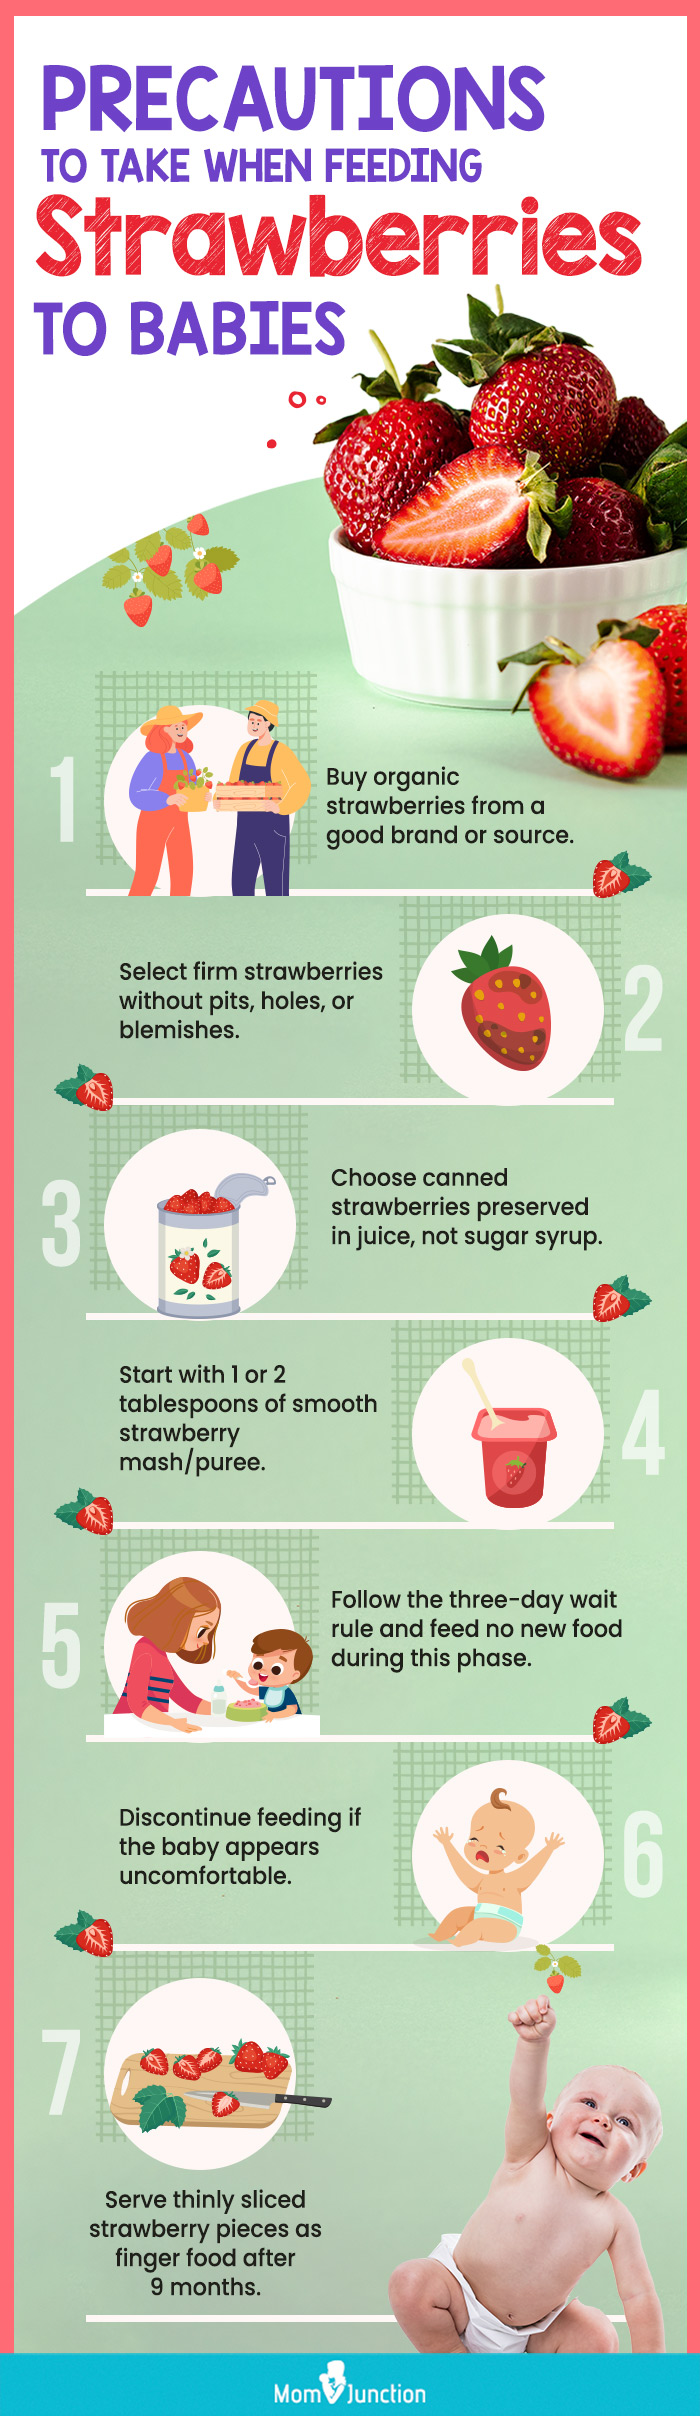 precautions to take when feeding strawberries to babies (infographic)